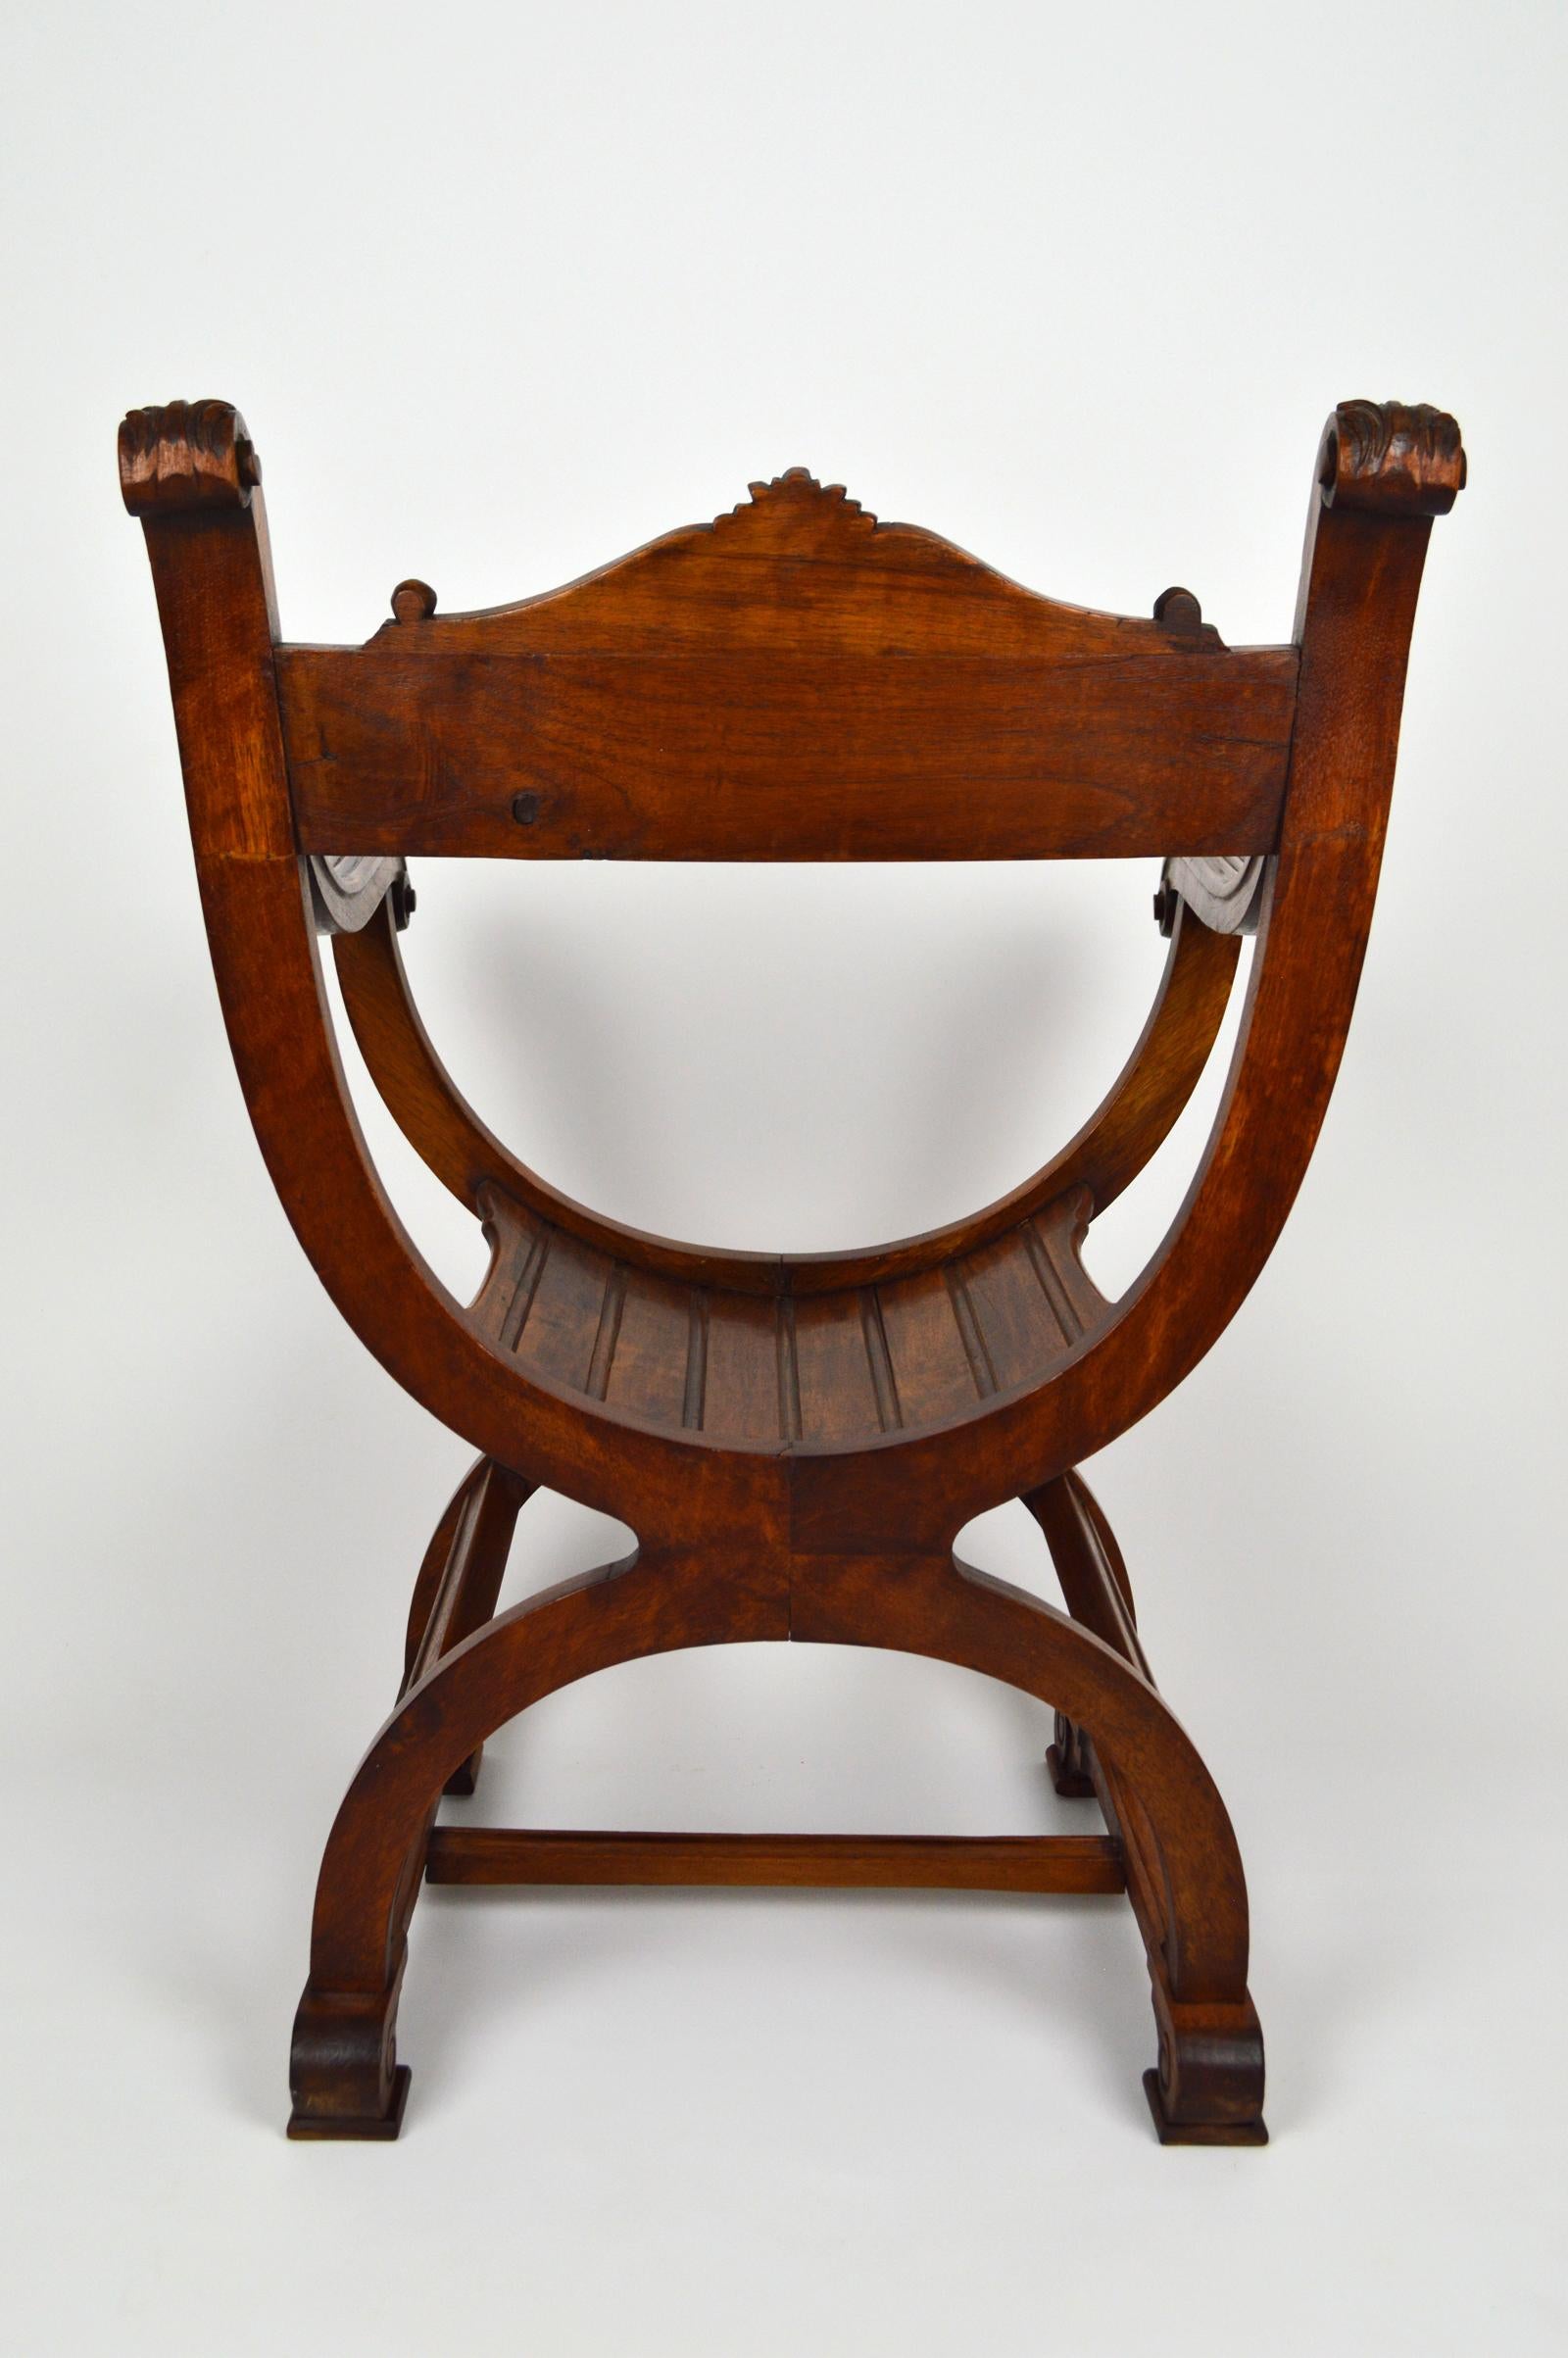 French Carved Walnut Curule or Armchair, Renaissance Revival, circa 1880 For Sale 10